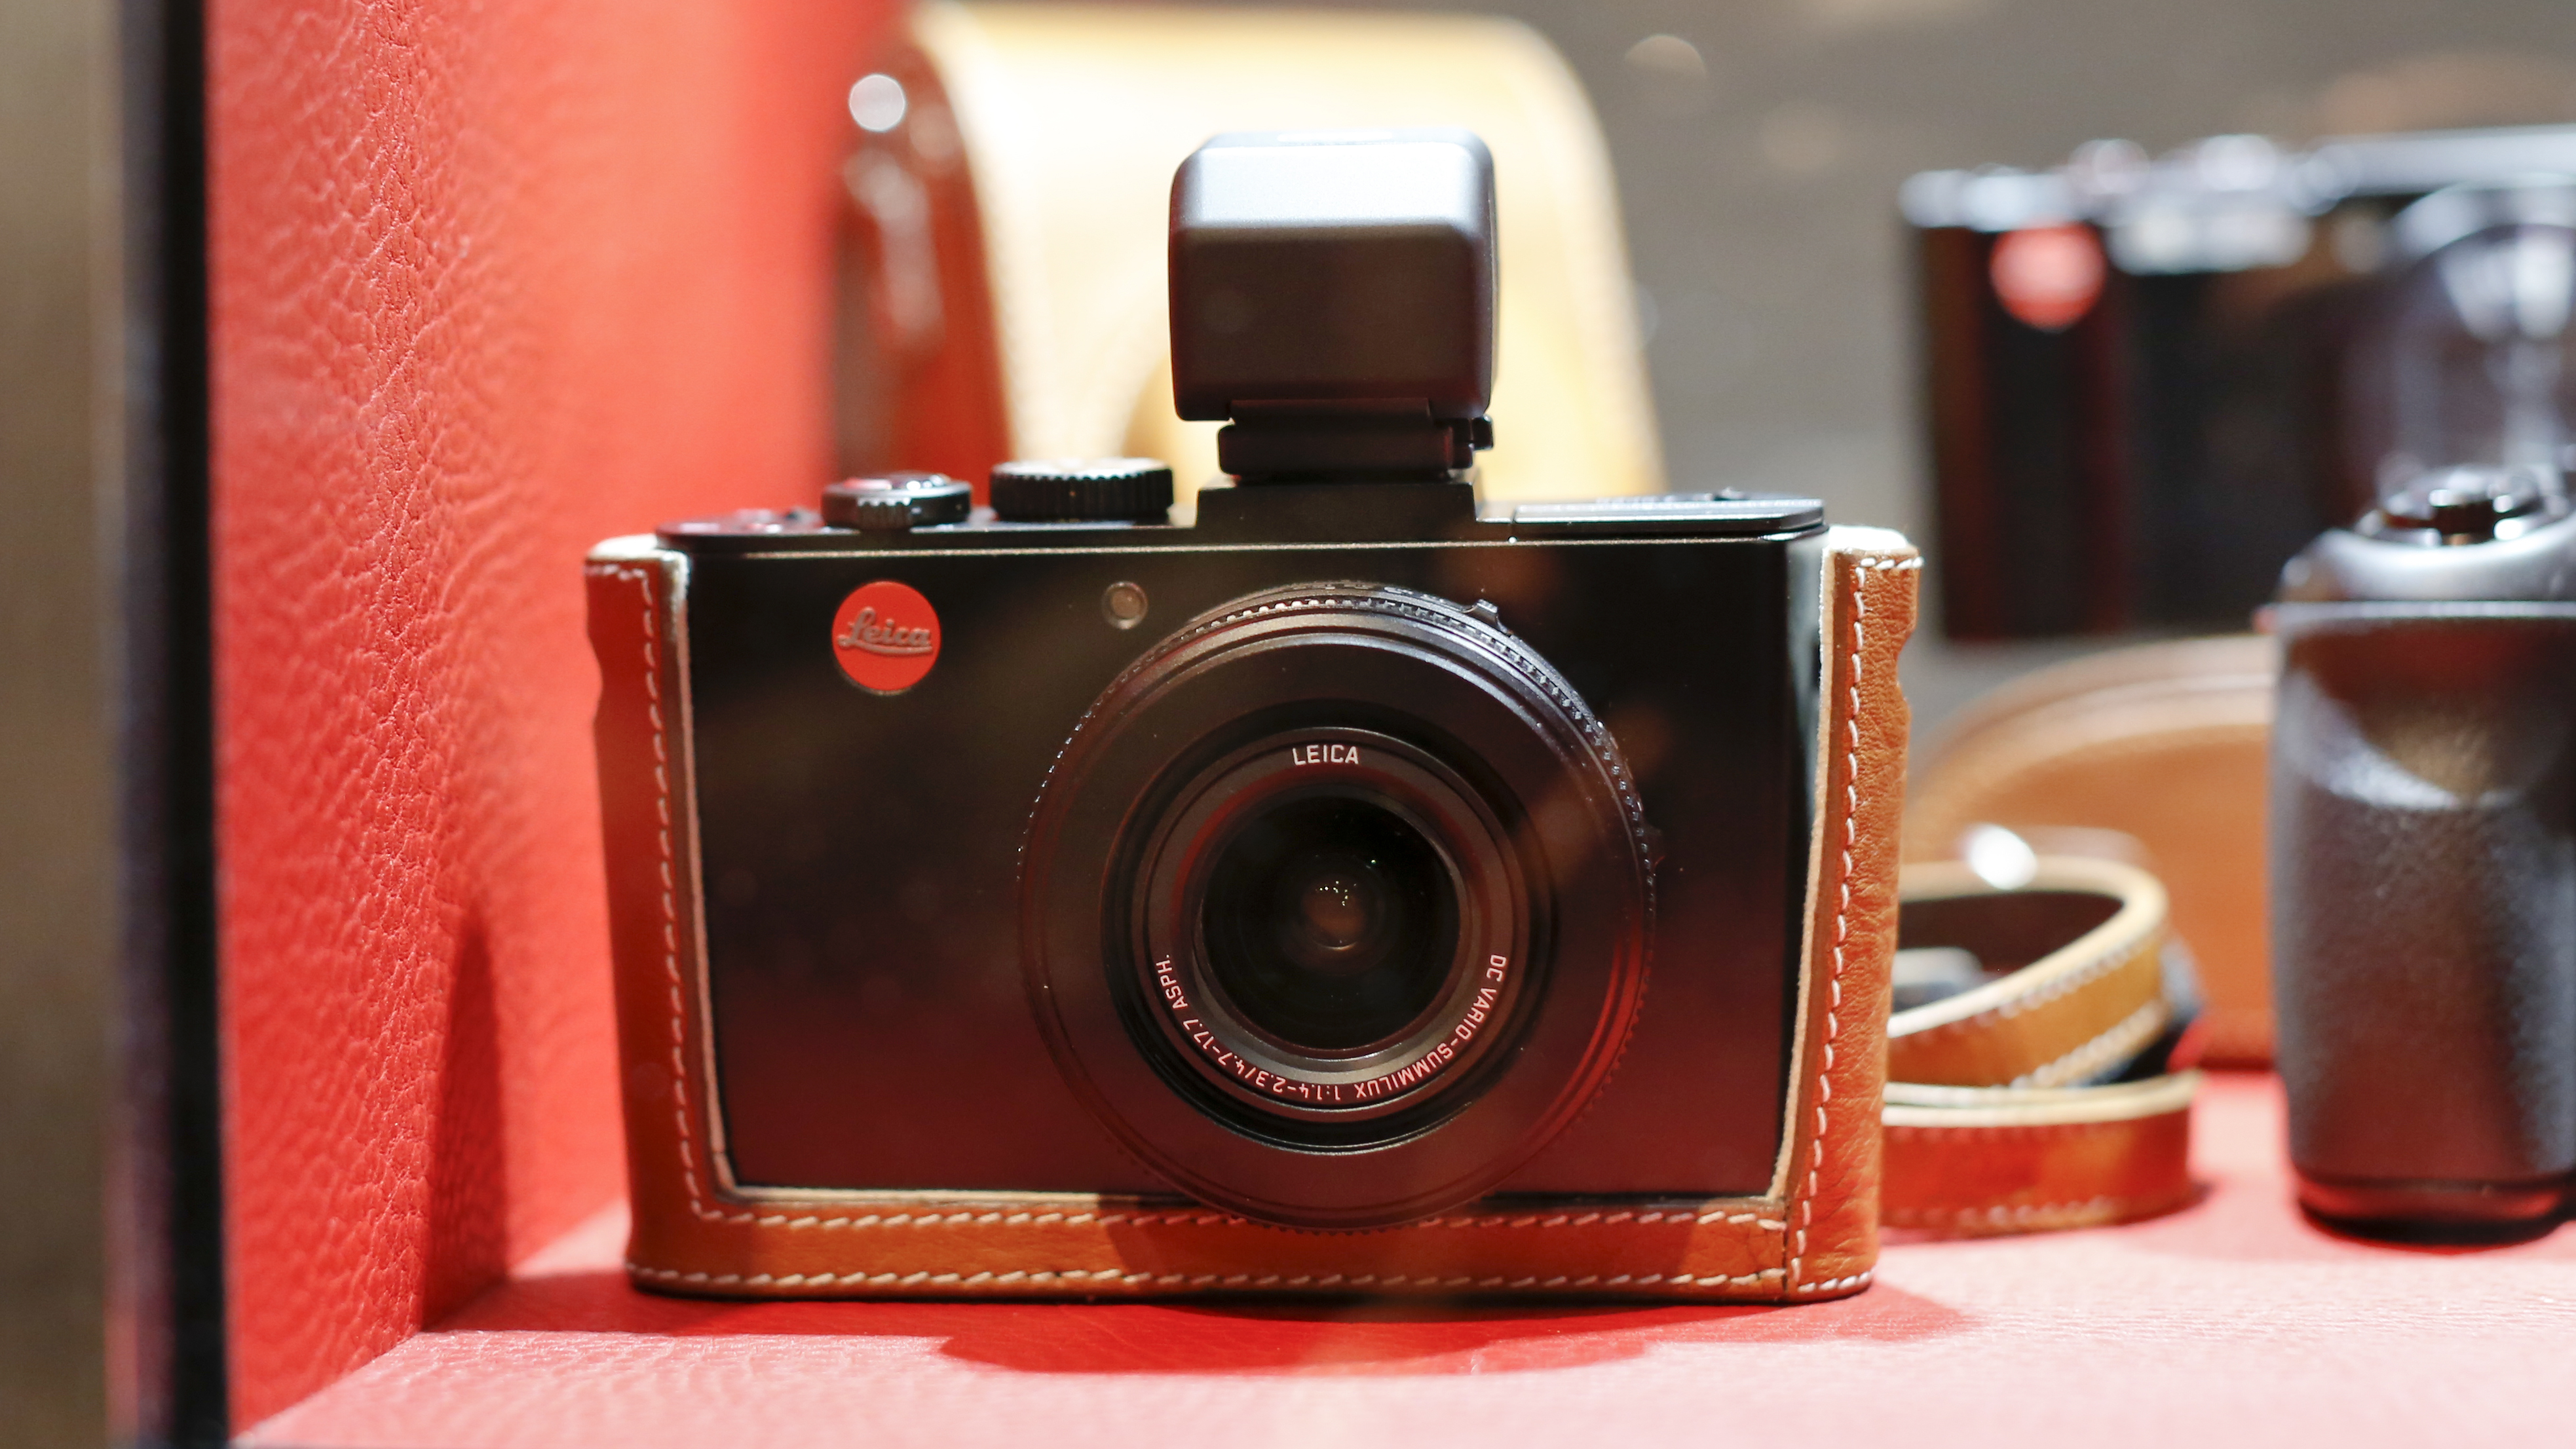 Leica D-Lux 6 revealed